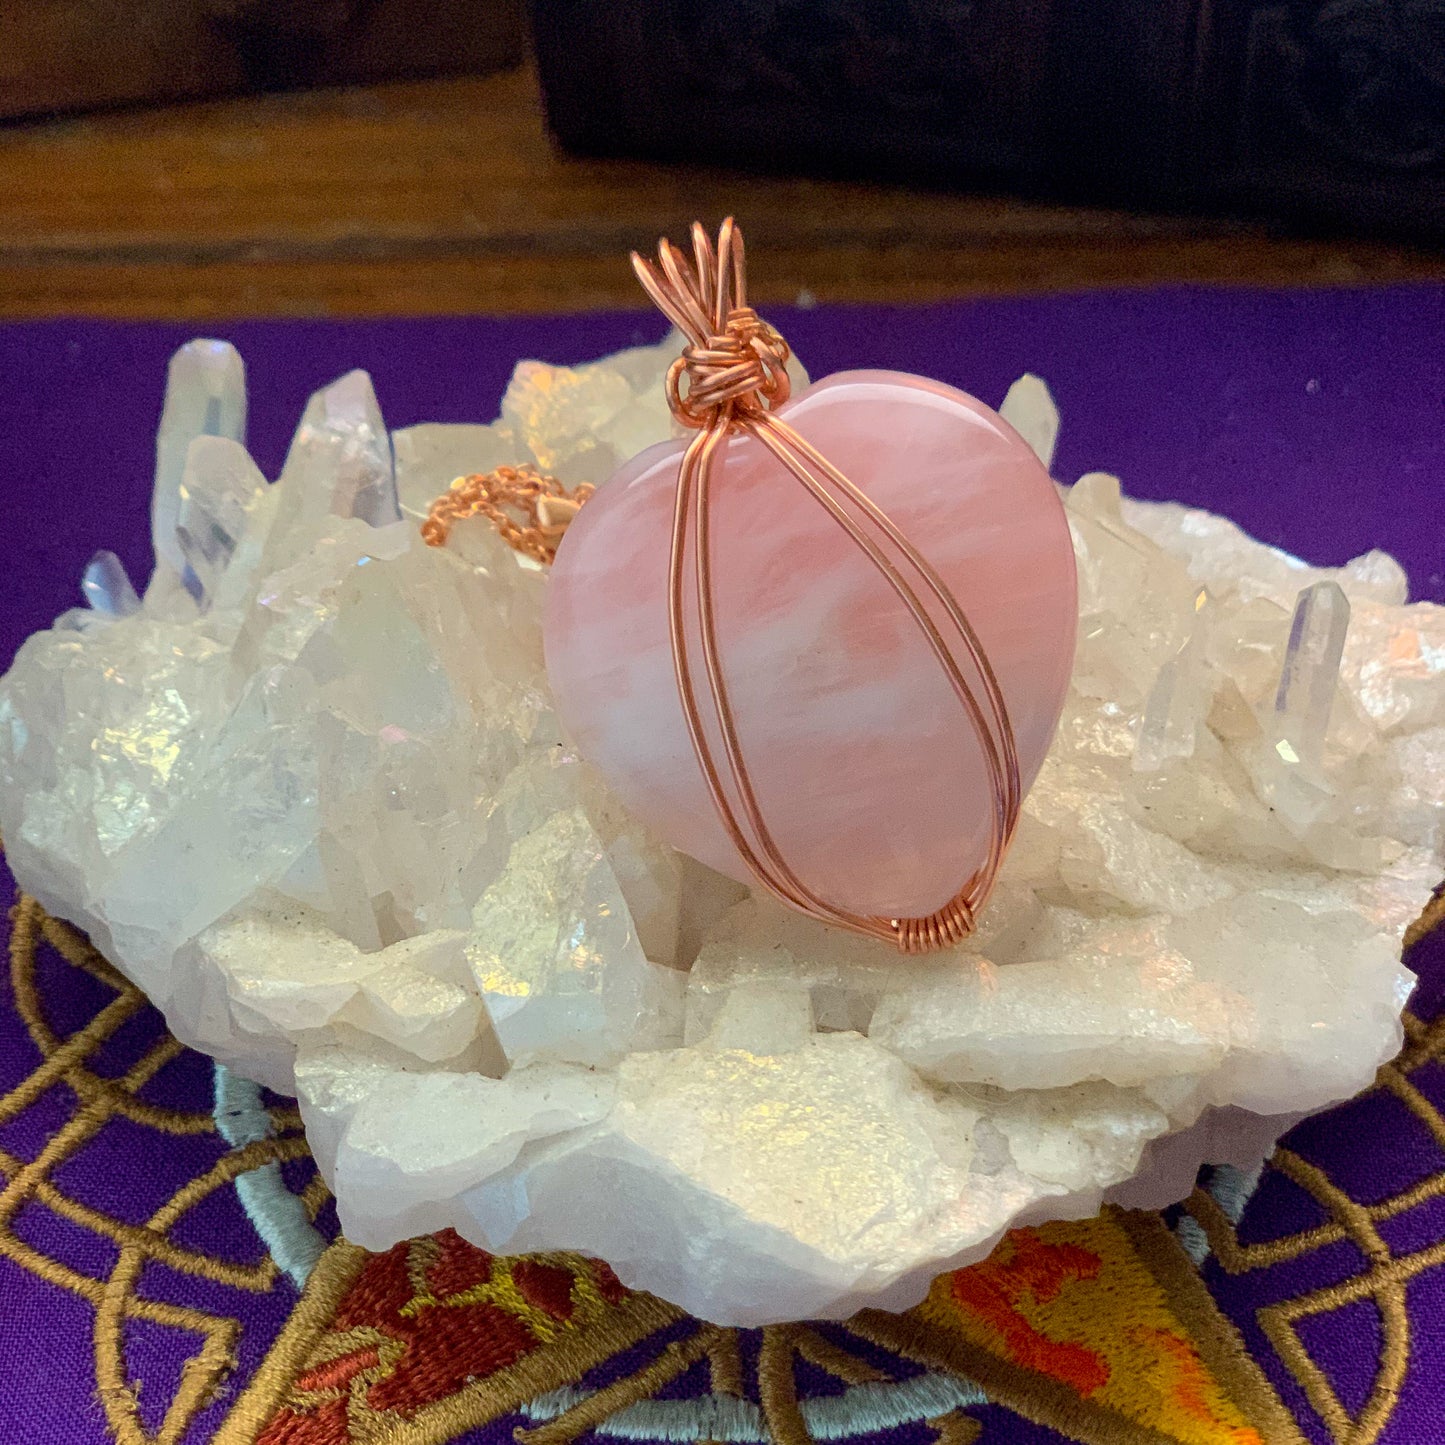 Rose Quartz “Stone of Unconditional Love” Copper Wrapped Pendant - For the Love of Natural Living, LLC 